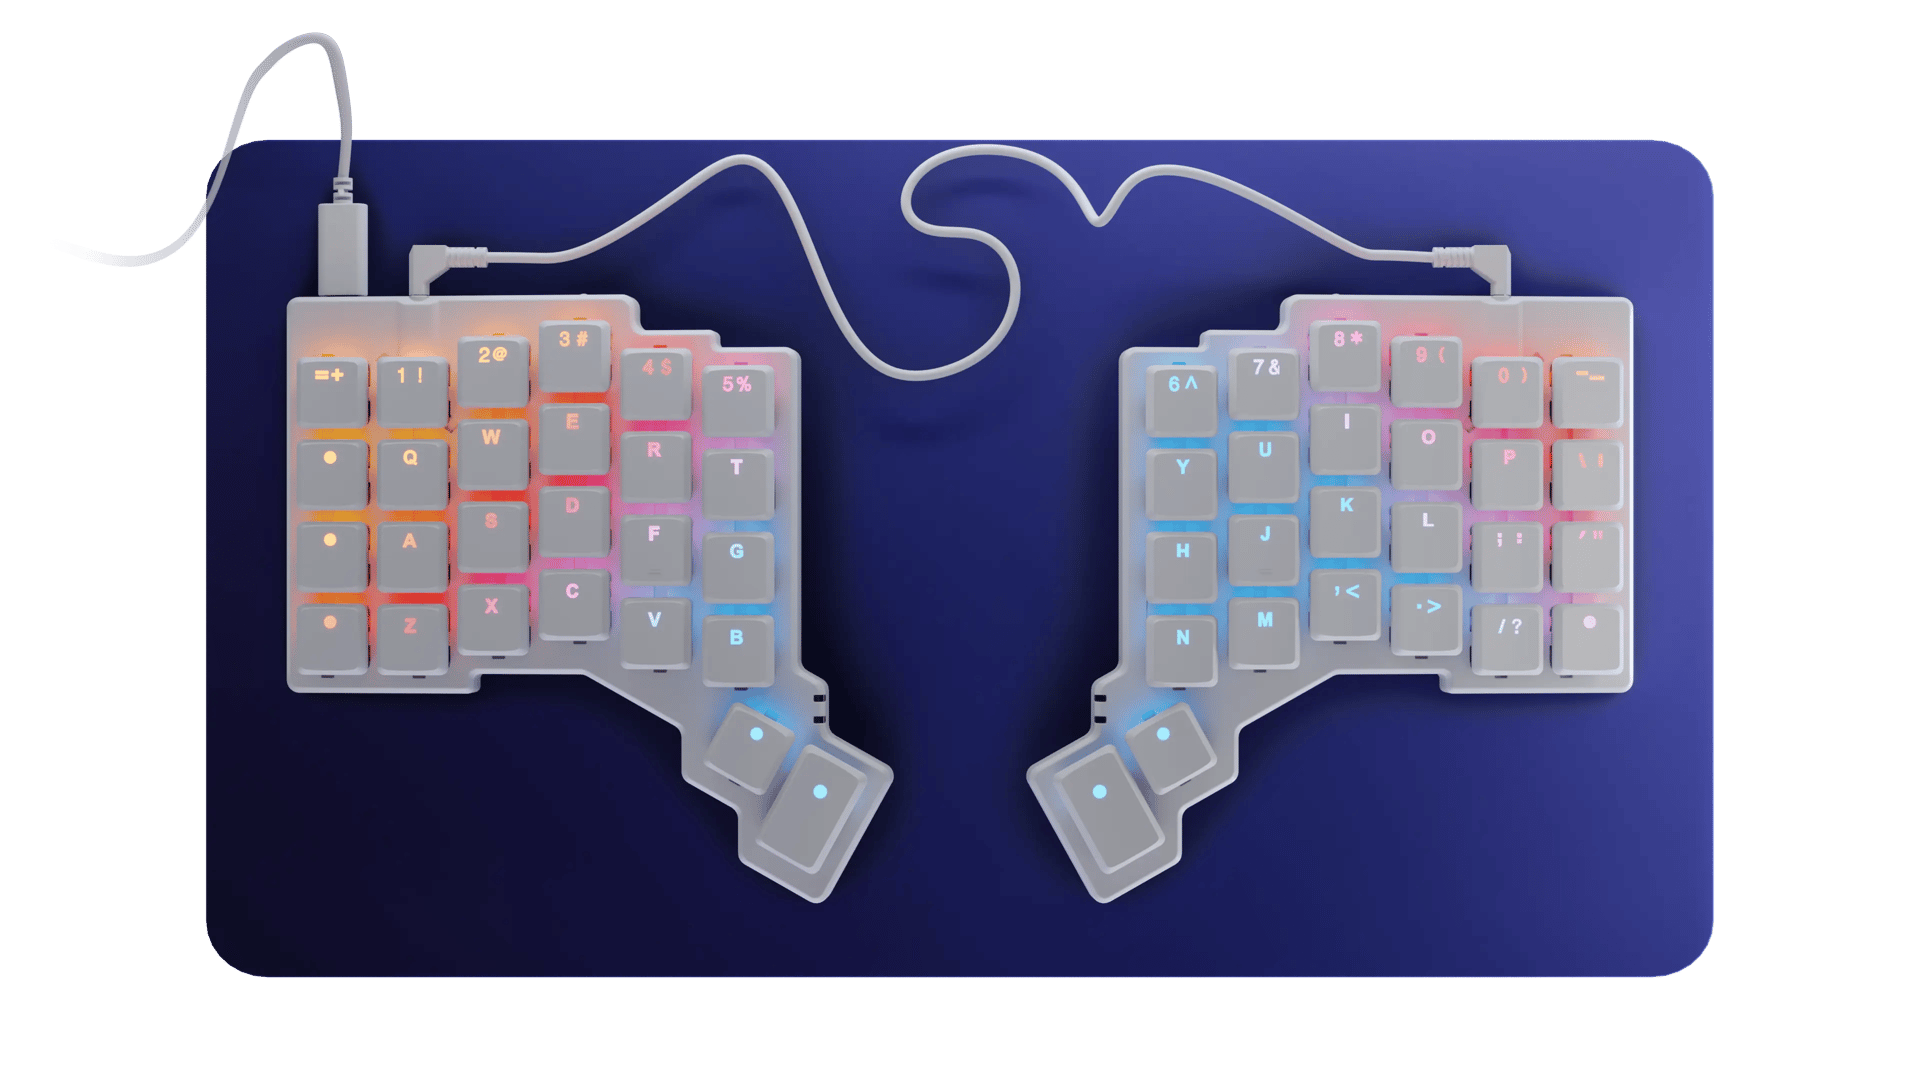 the light variant us set of voyager keycaps